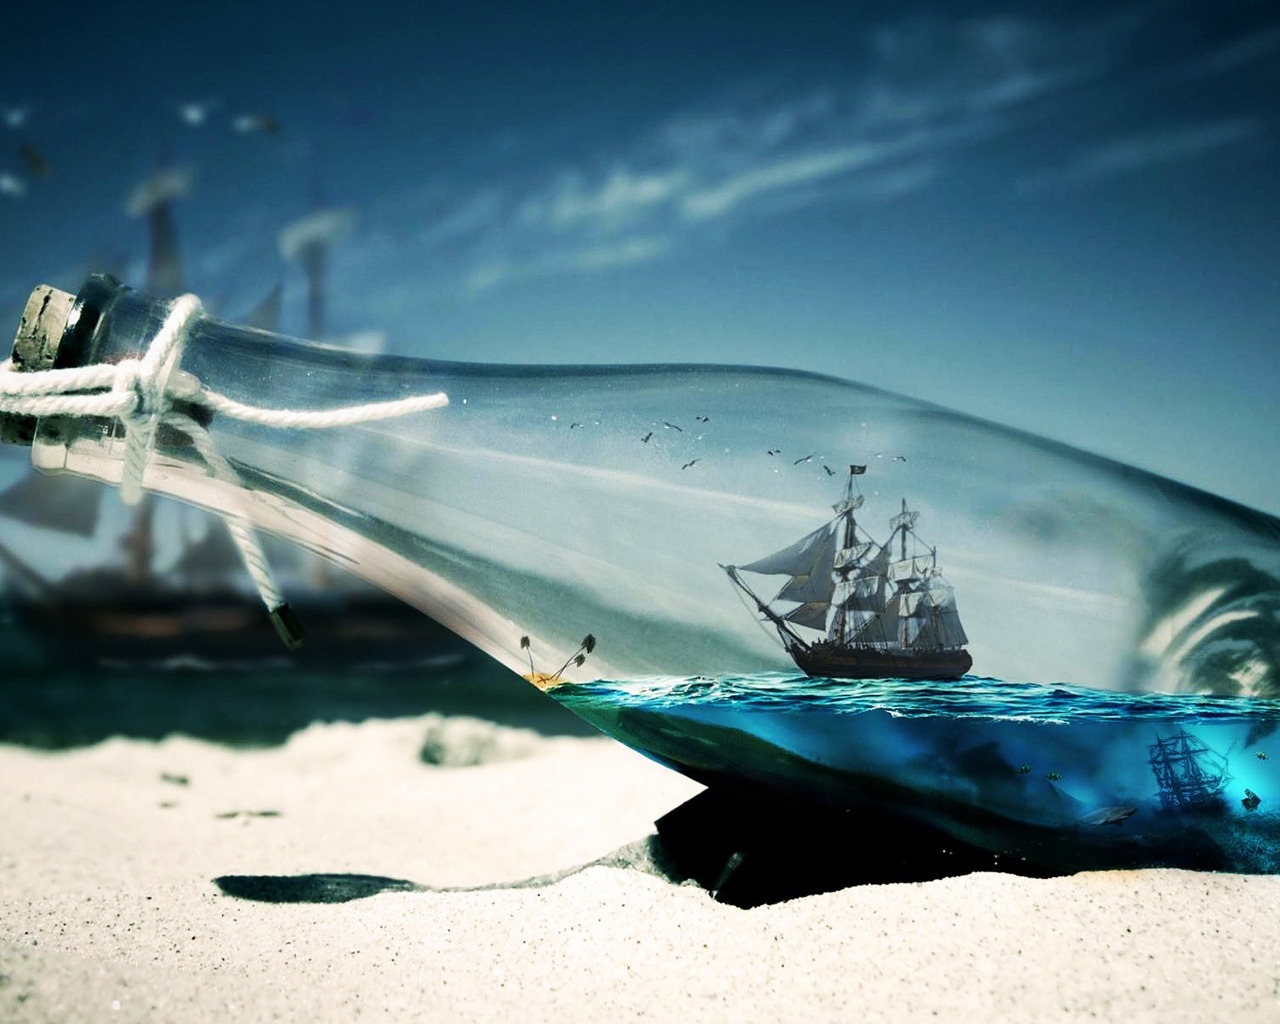 Sailing in a Bottle for 1280 x 1024 resolution